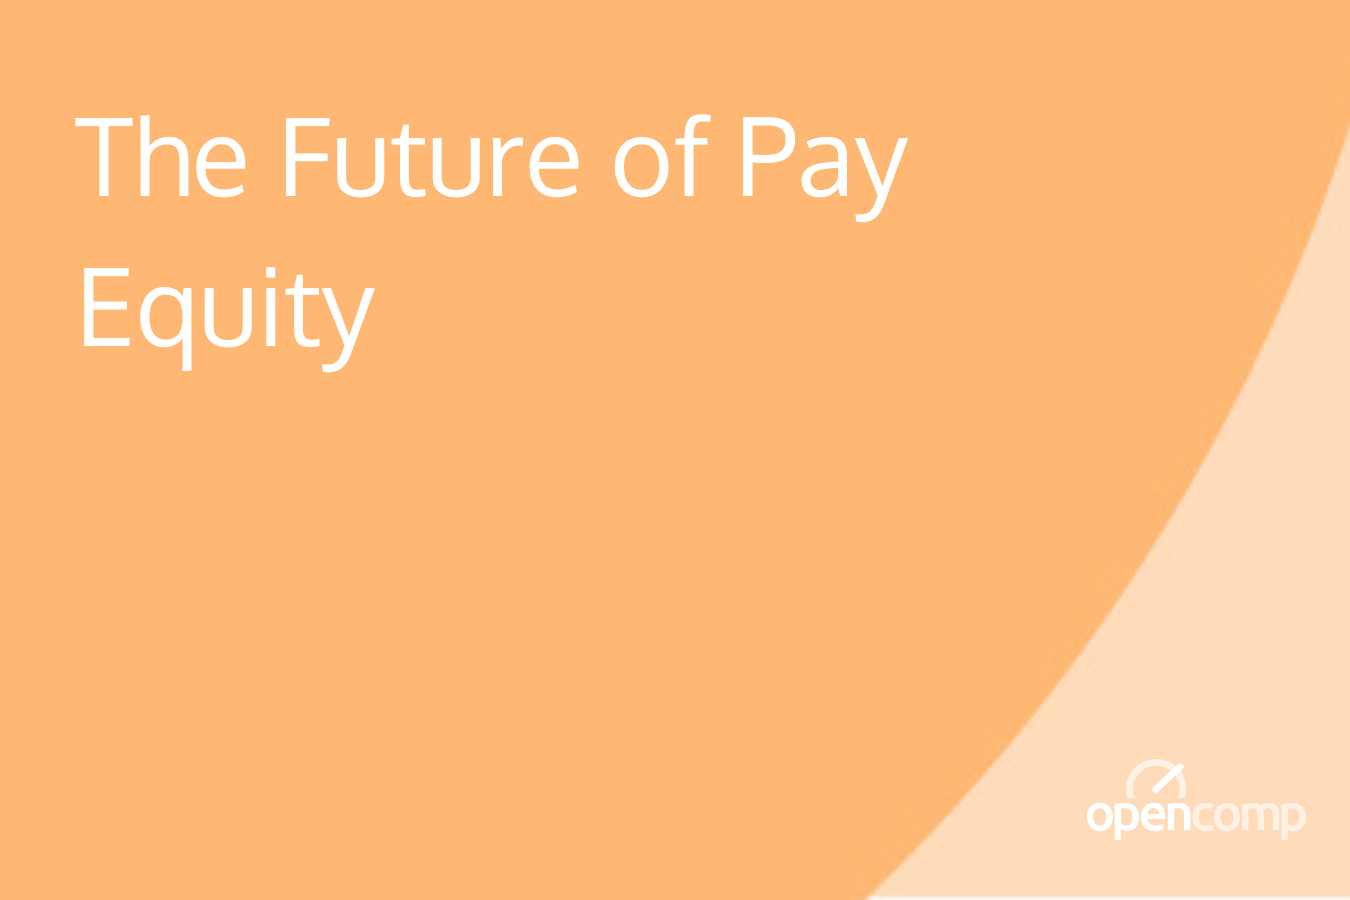 The Future of Pay Equity